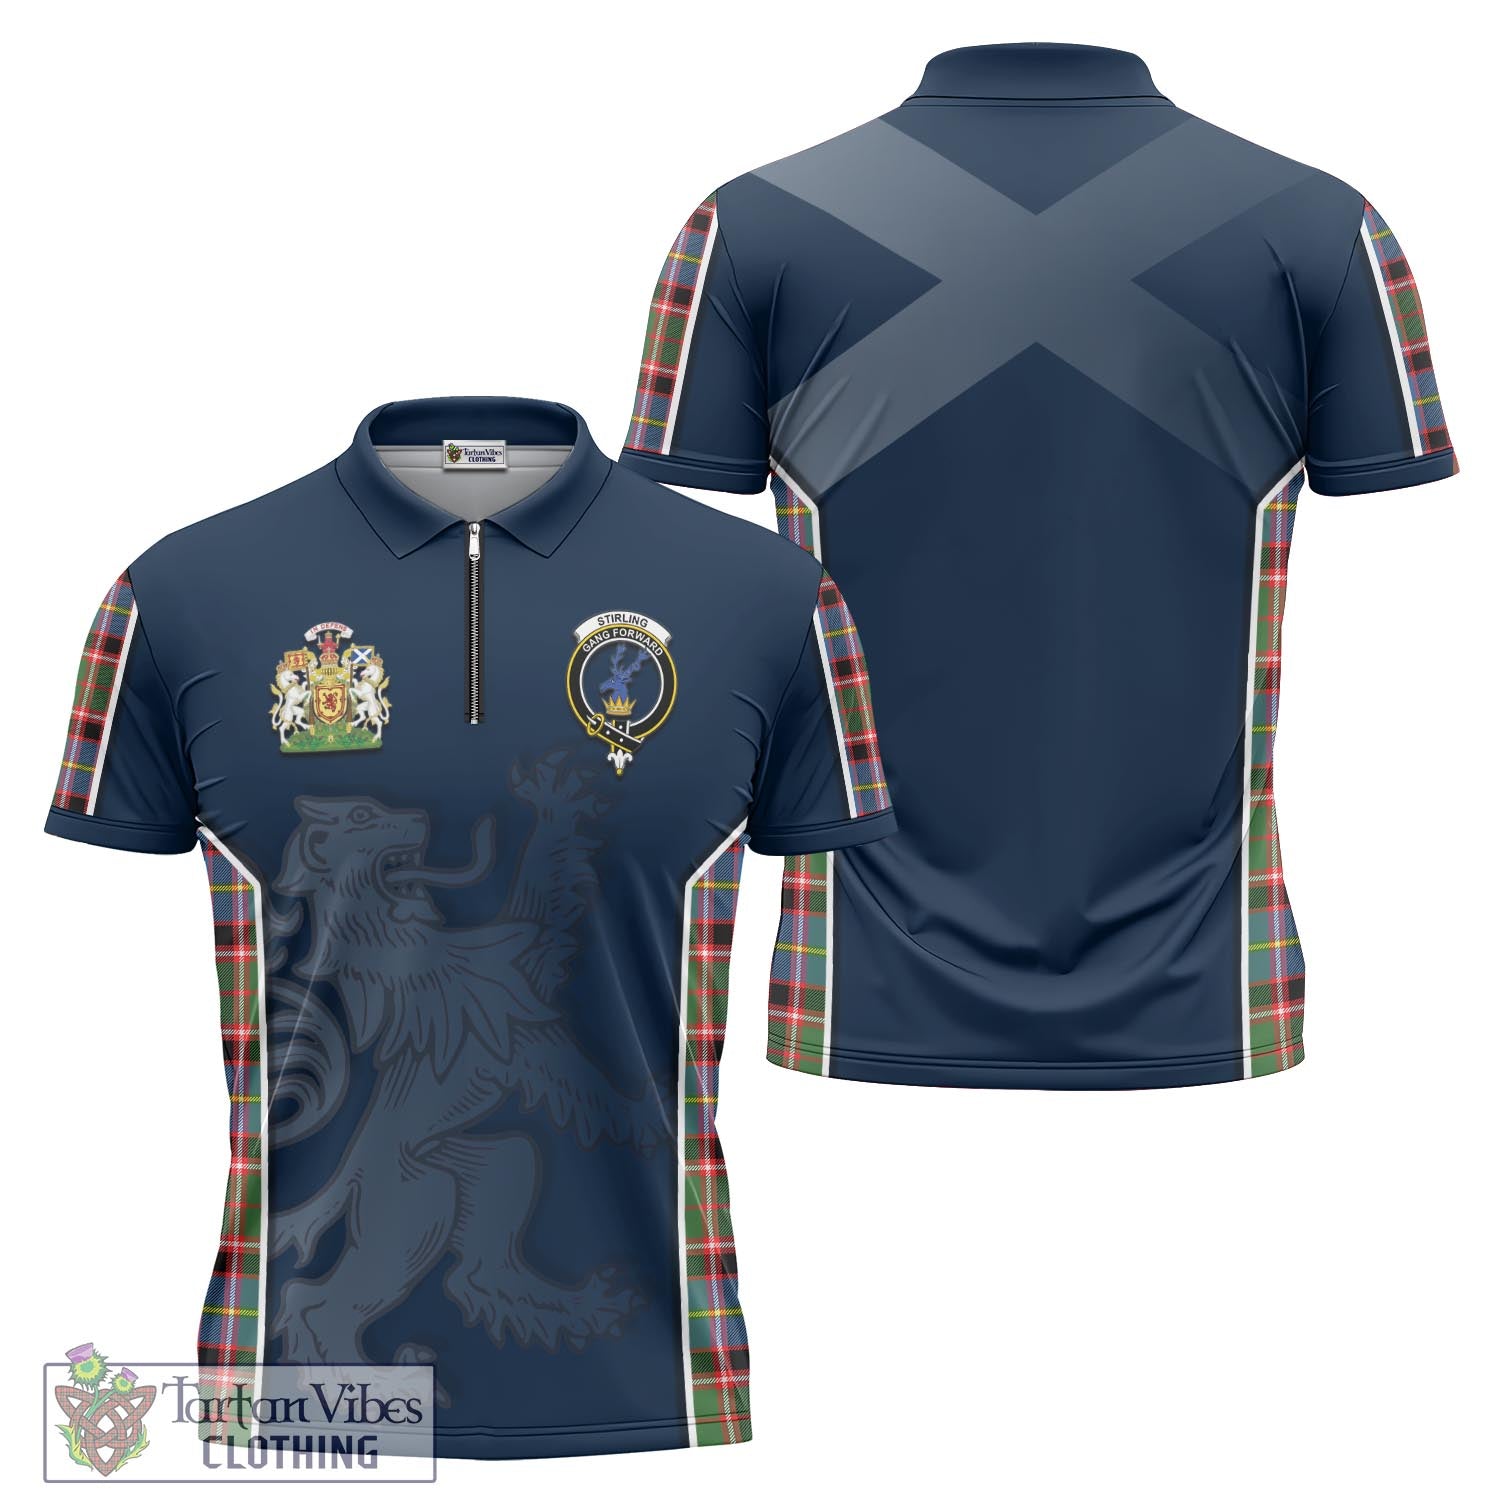 Tartan Vibes Clothing Stirling Bannockburn Tartan Zipper Polo Shirt with Family Crest and Lion Rampant Vibes Sport Style